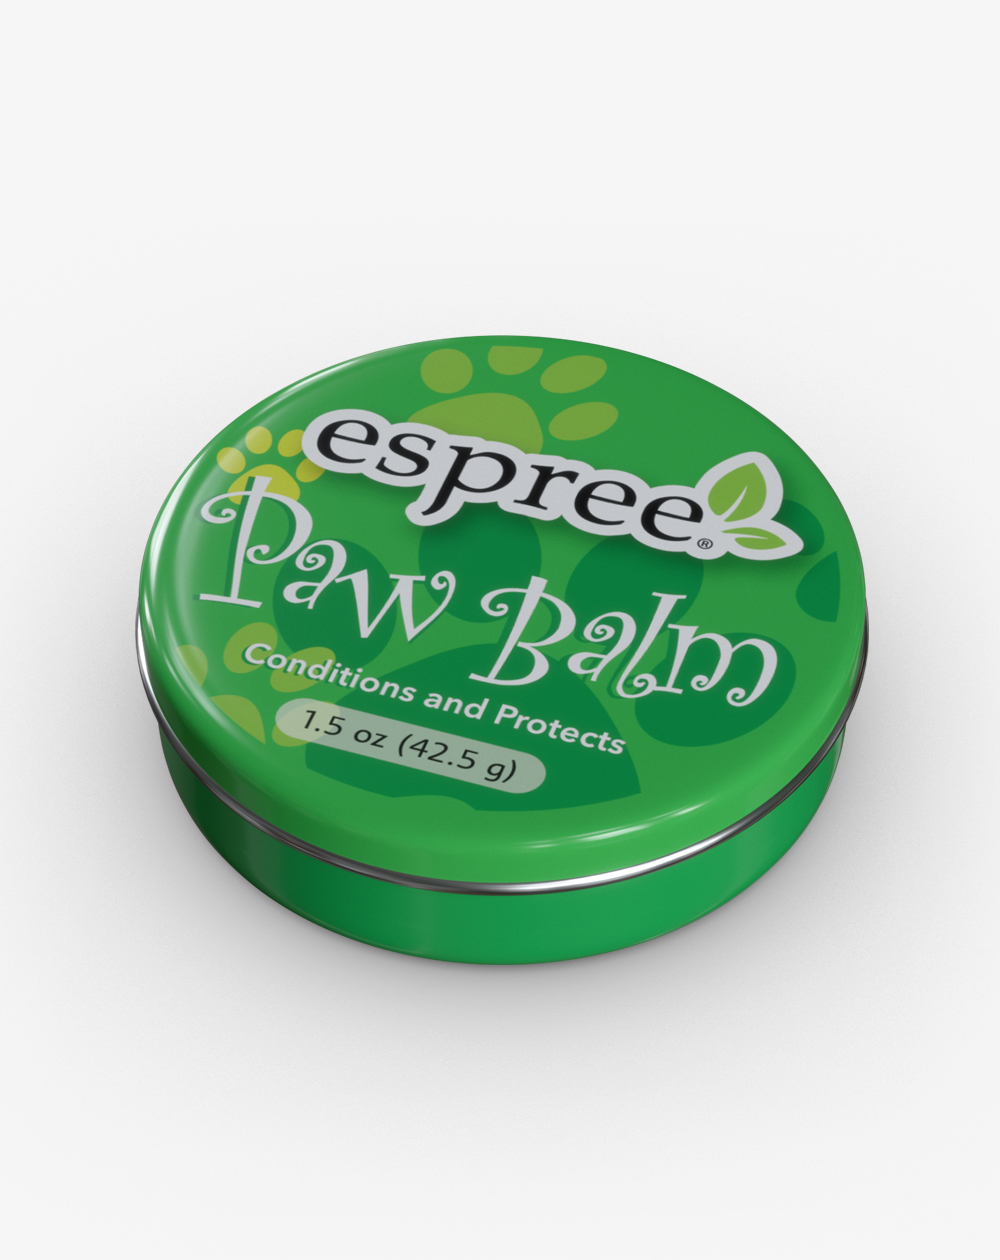 Paw Balm Espree Paw Balm restores moisture and softens paw pads פטשופסל פטשופטבע